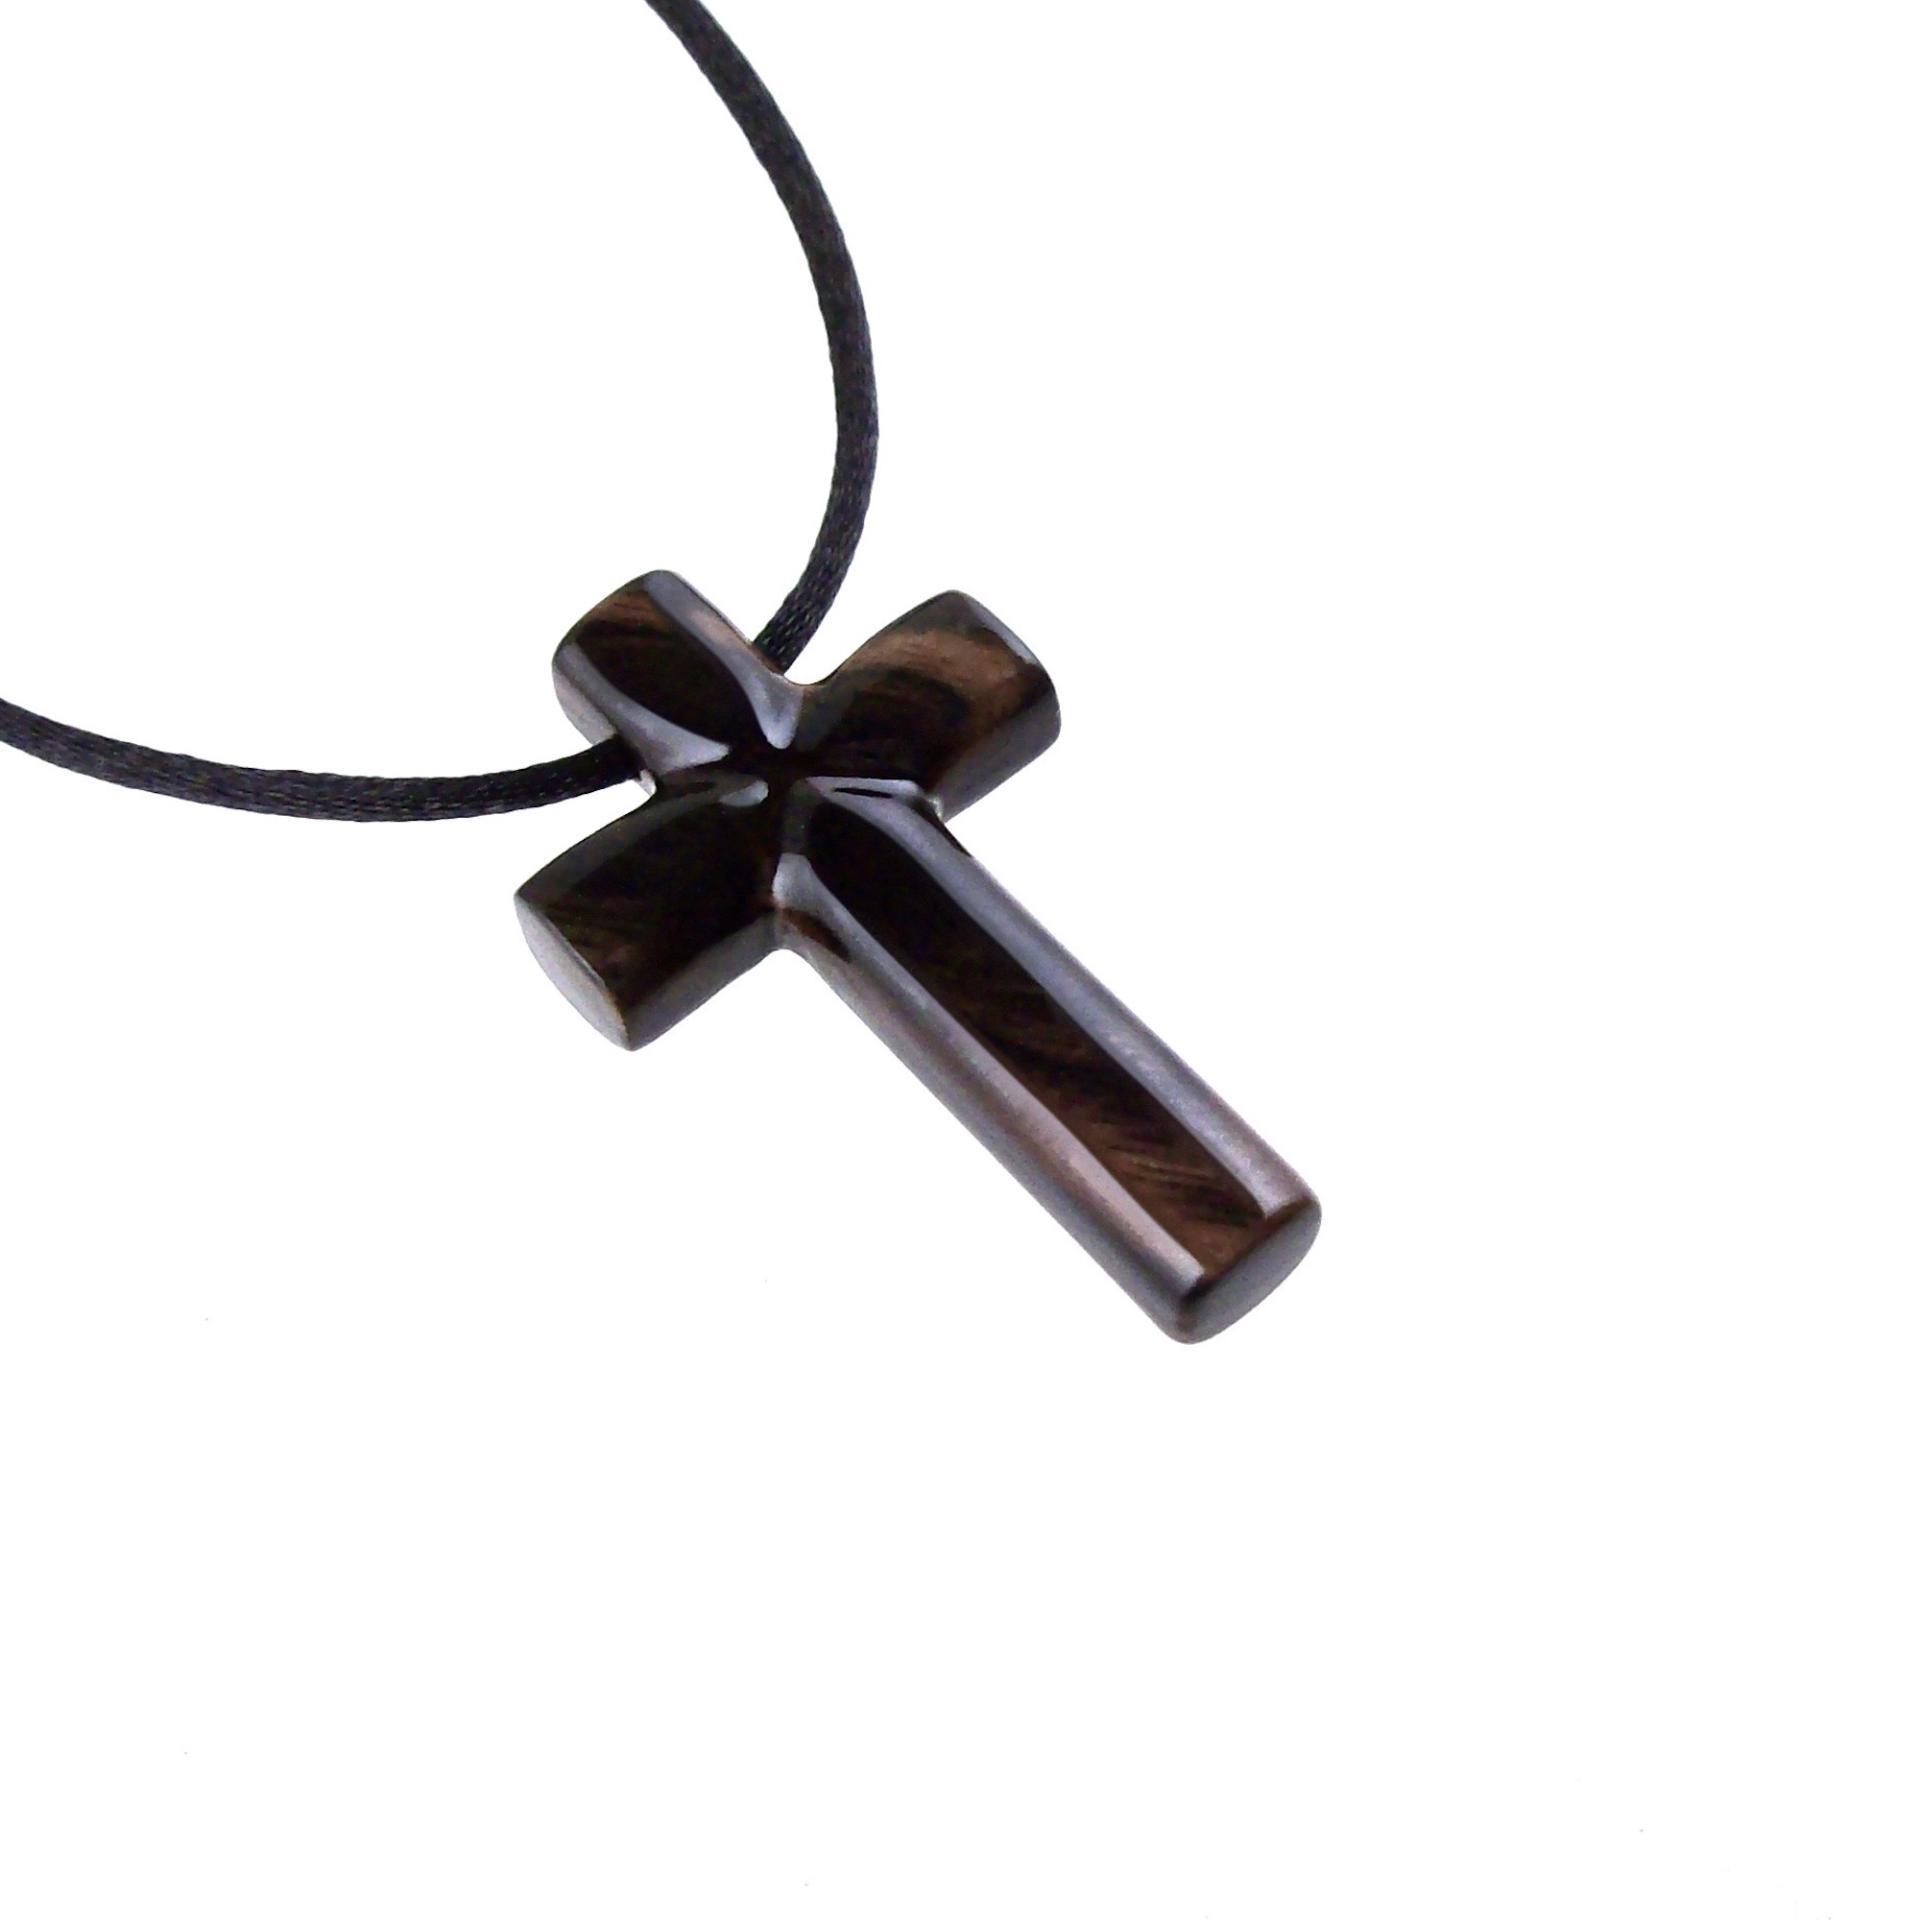 Hand Carved Wood Cross Necklace, Wooden Cross Pendant, Christian Jewelry for Men in Black with Brown Streaks